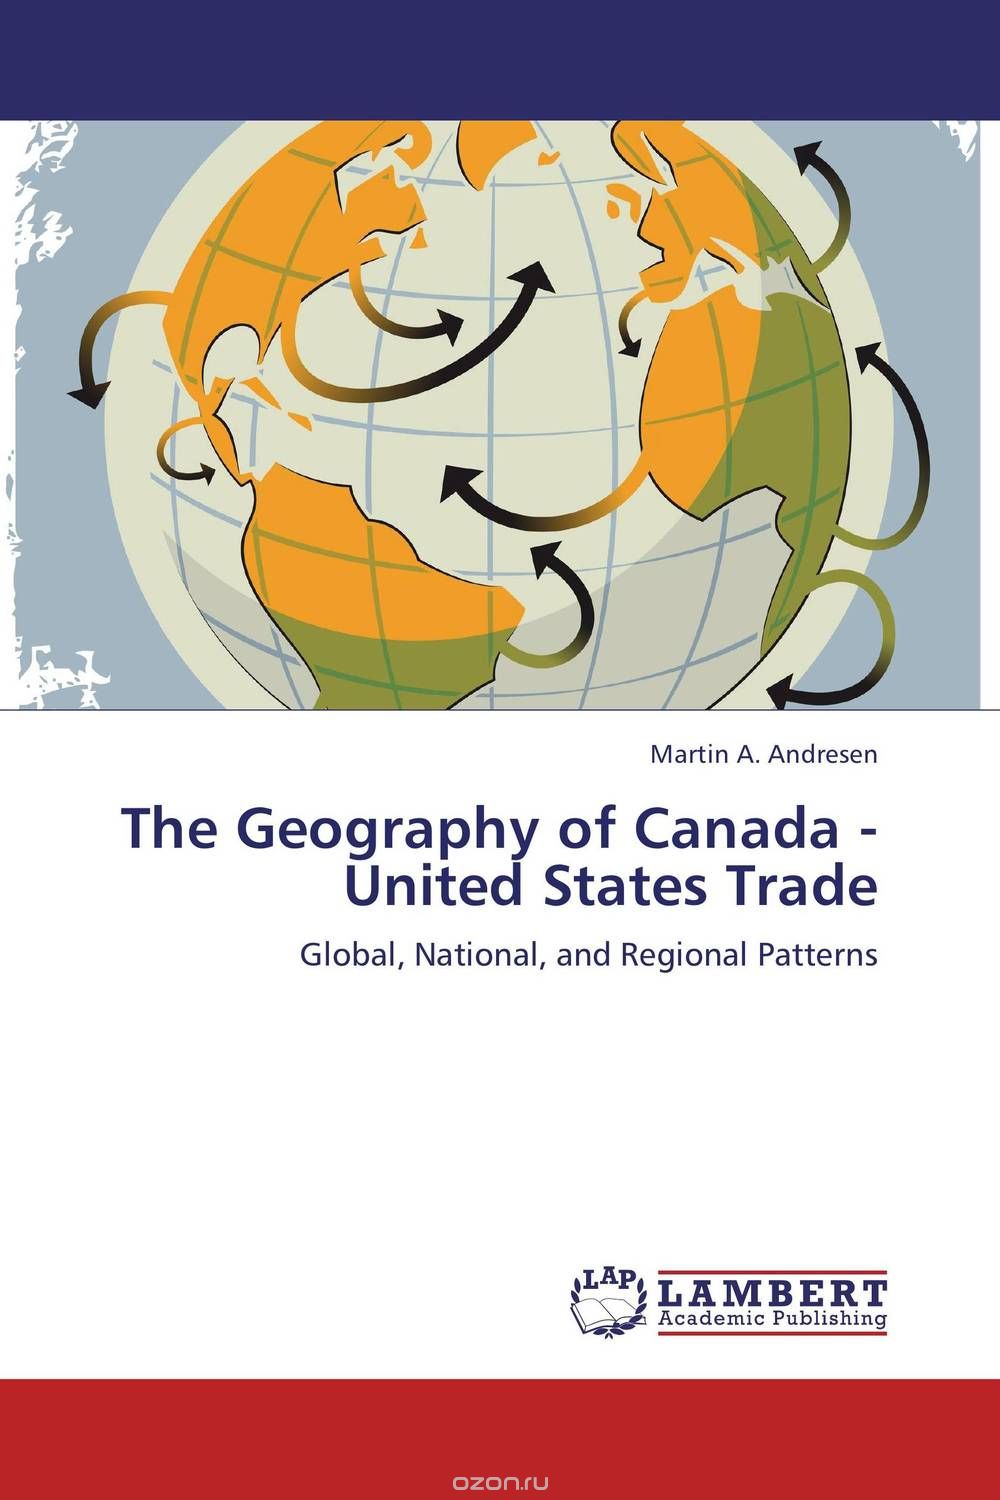 The Geography of Canada - United States Trade